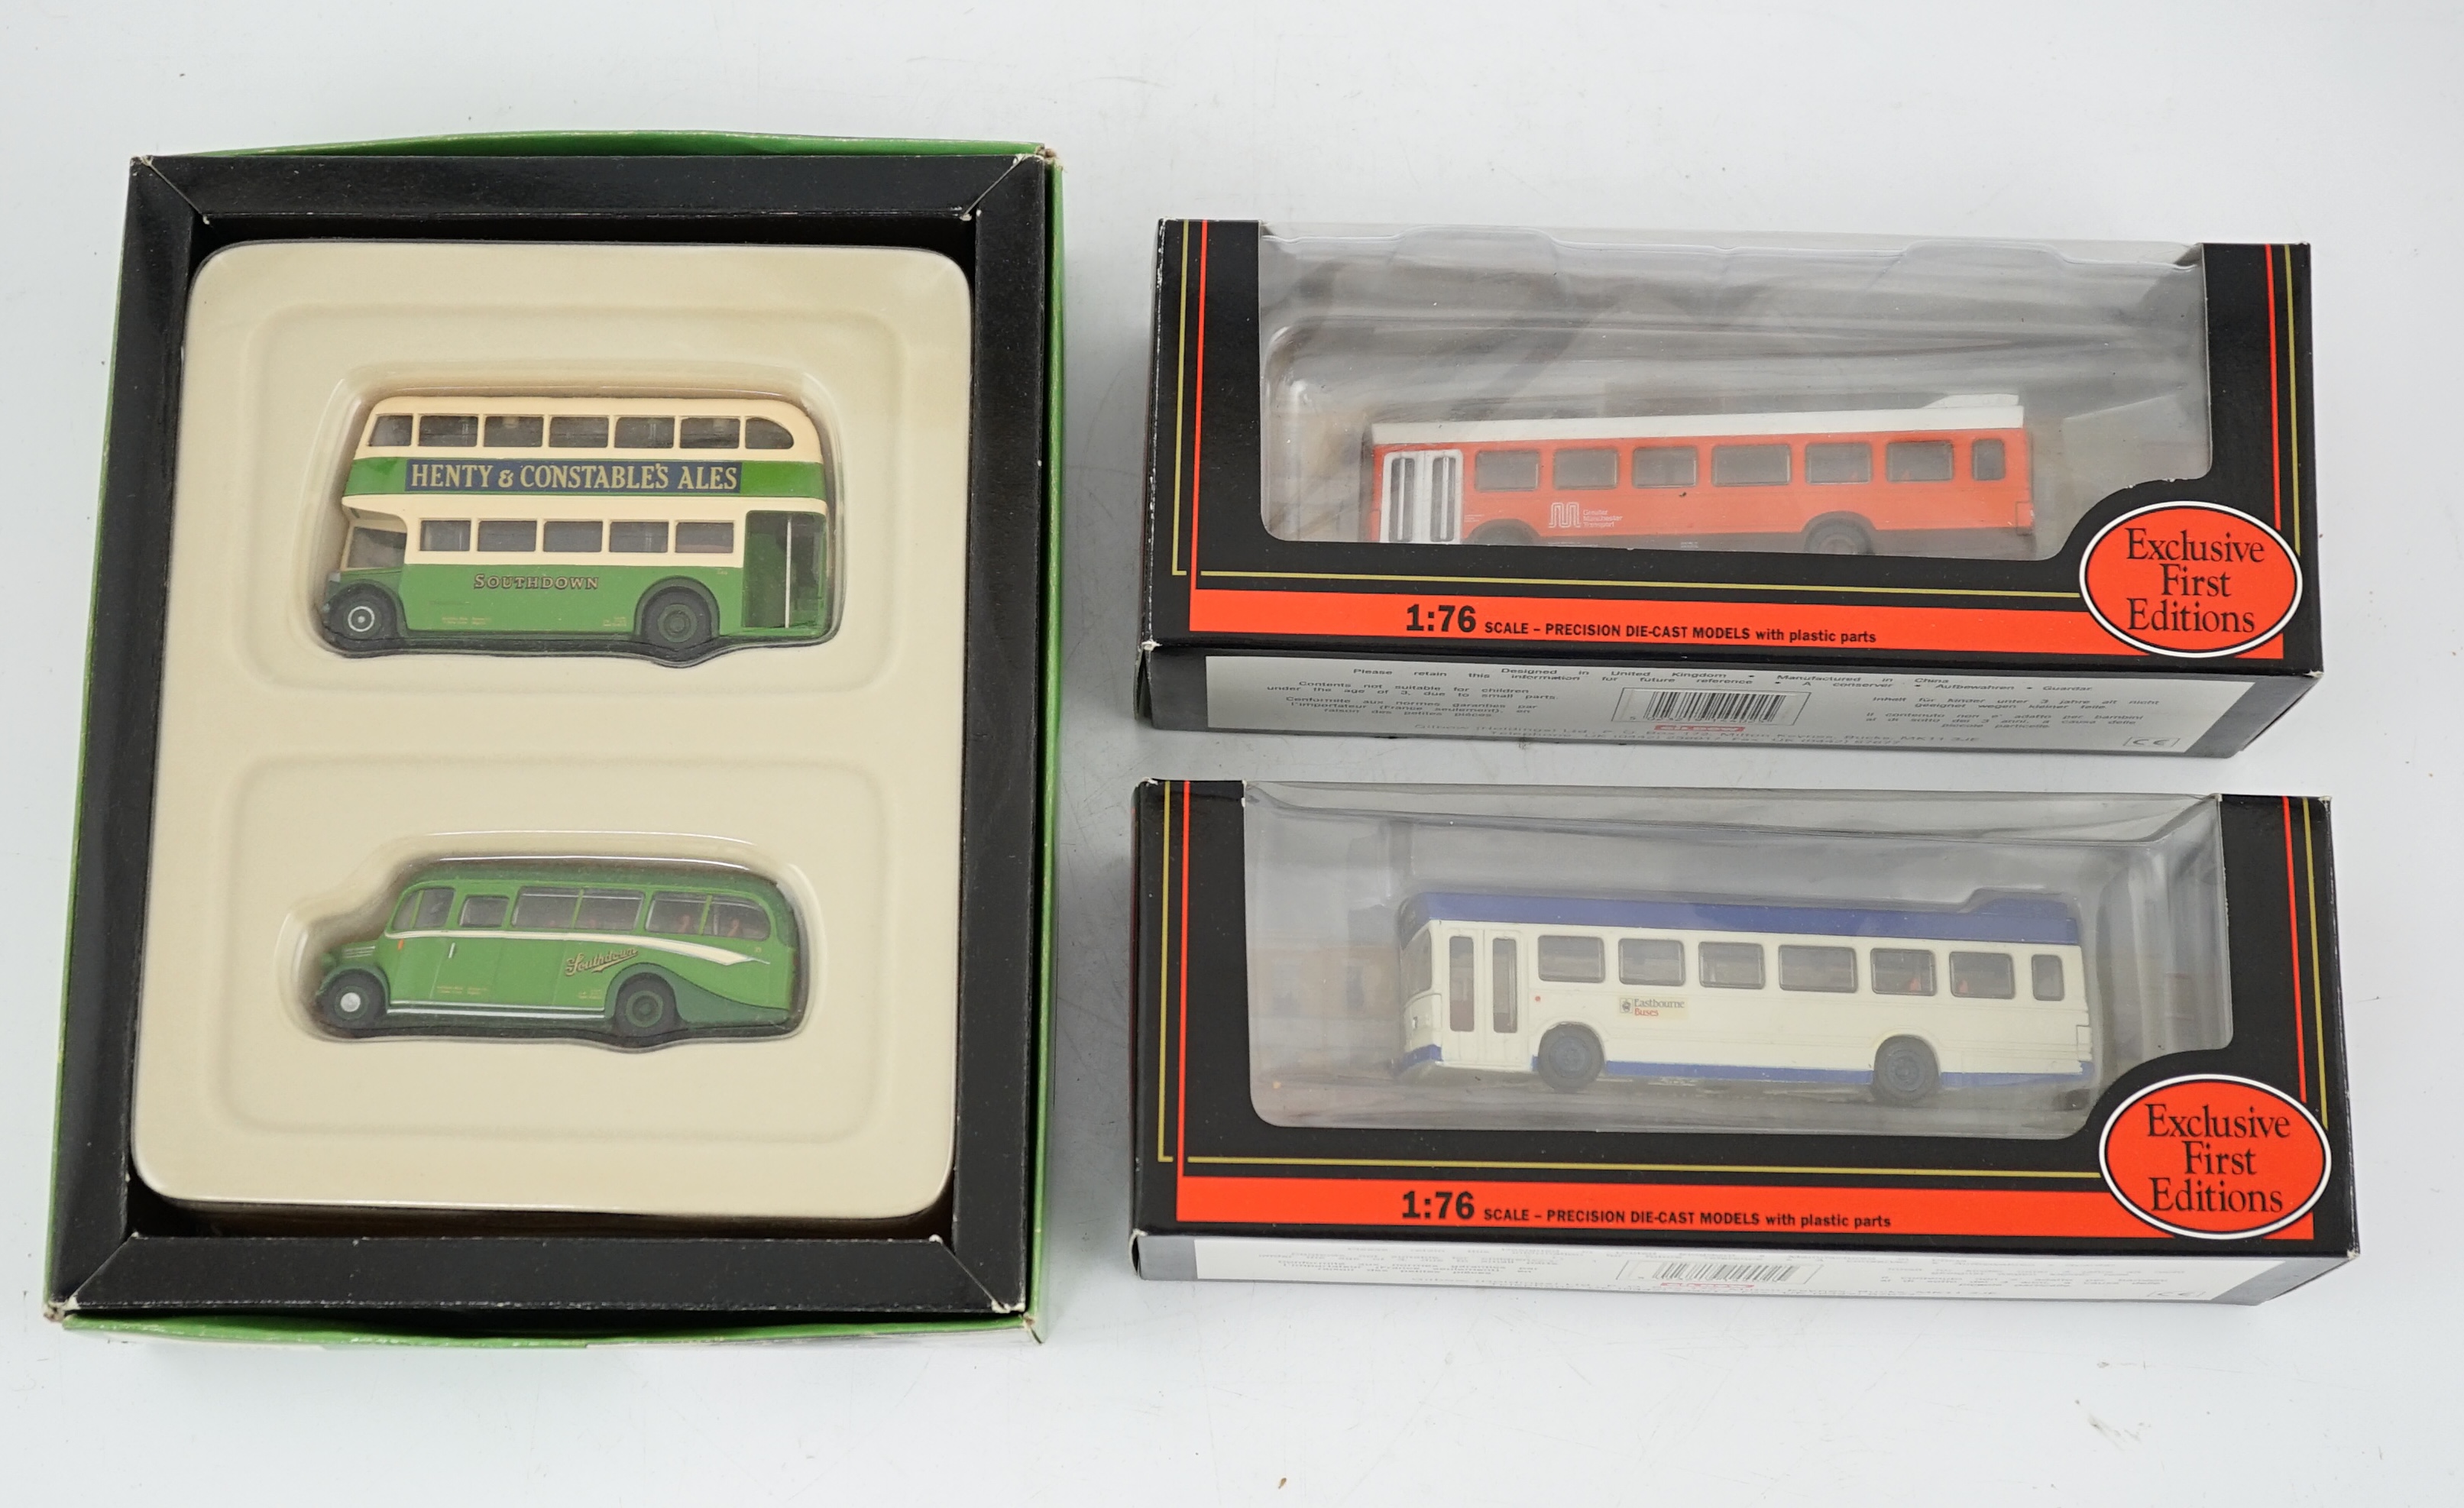 Thirty-two boxed EFE diecast buses, coaches, gift sets, etc. and one Britbus, operators including; East Kent, green line, Hants and Dorset, Southdown, National express, etc.